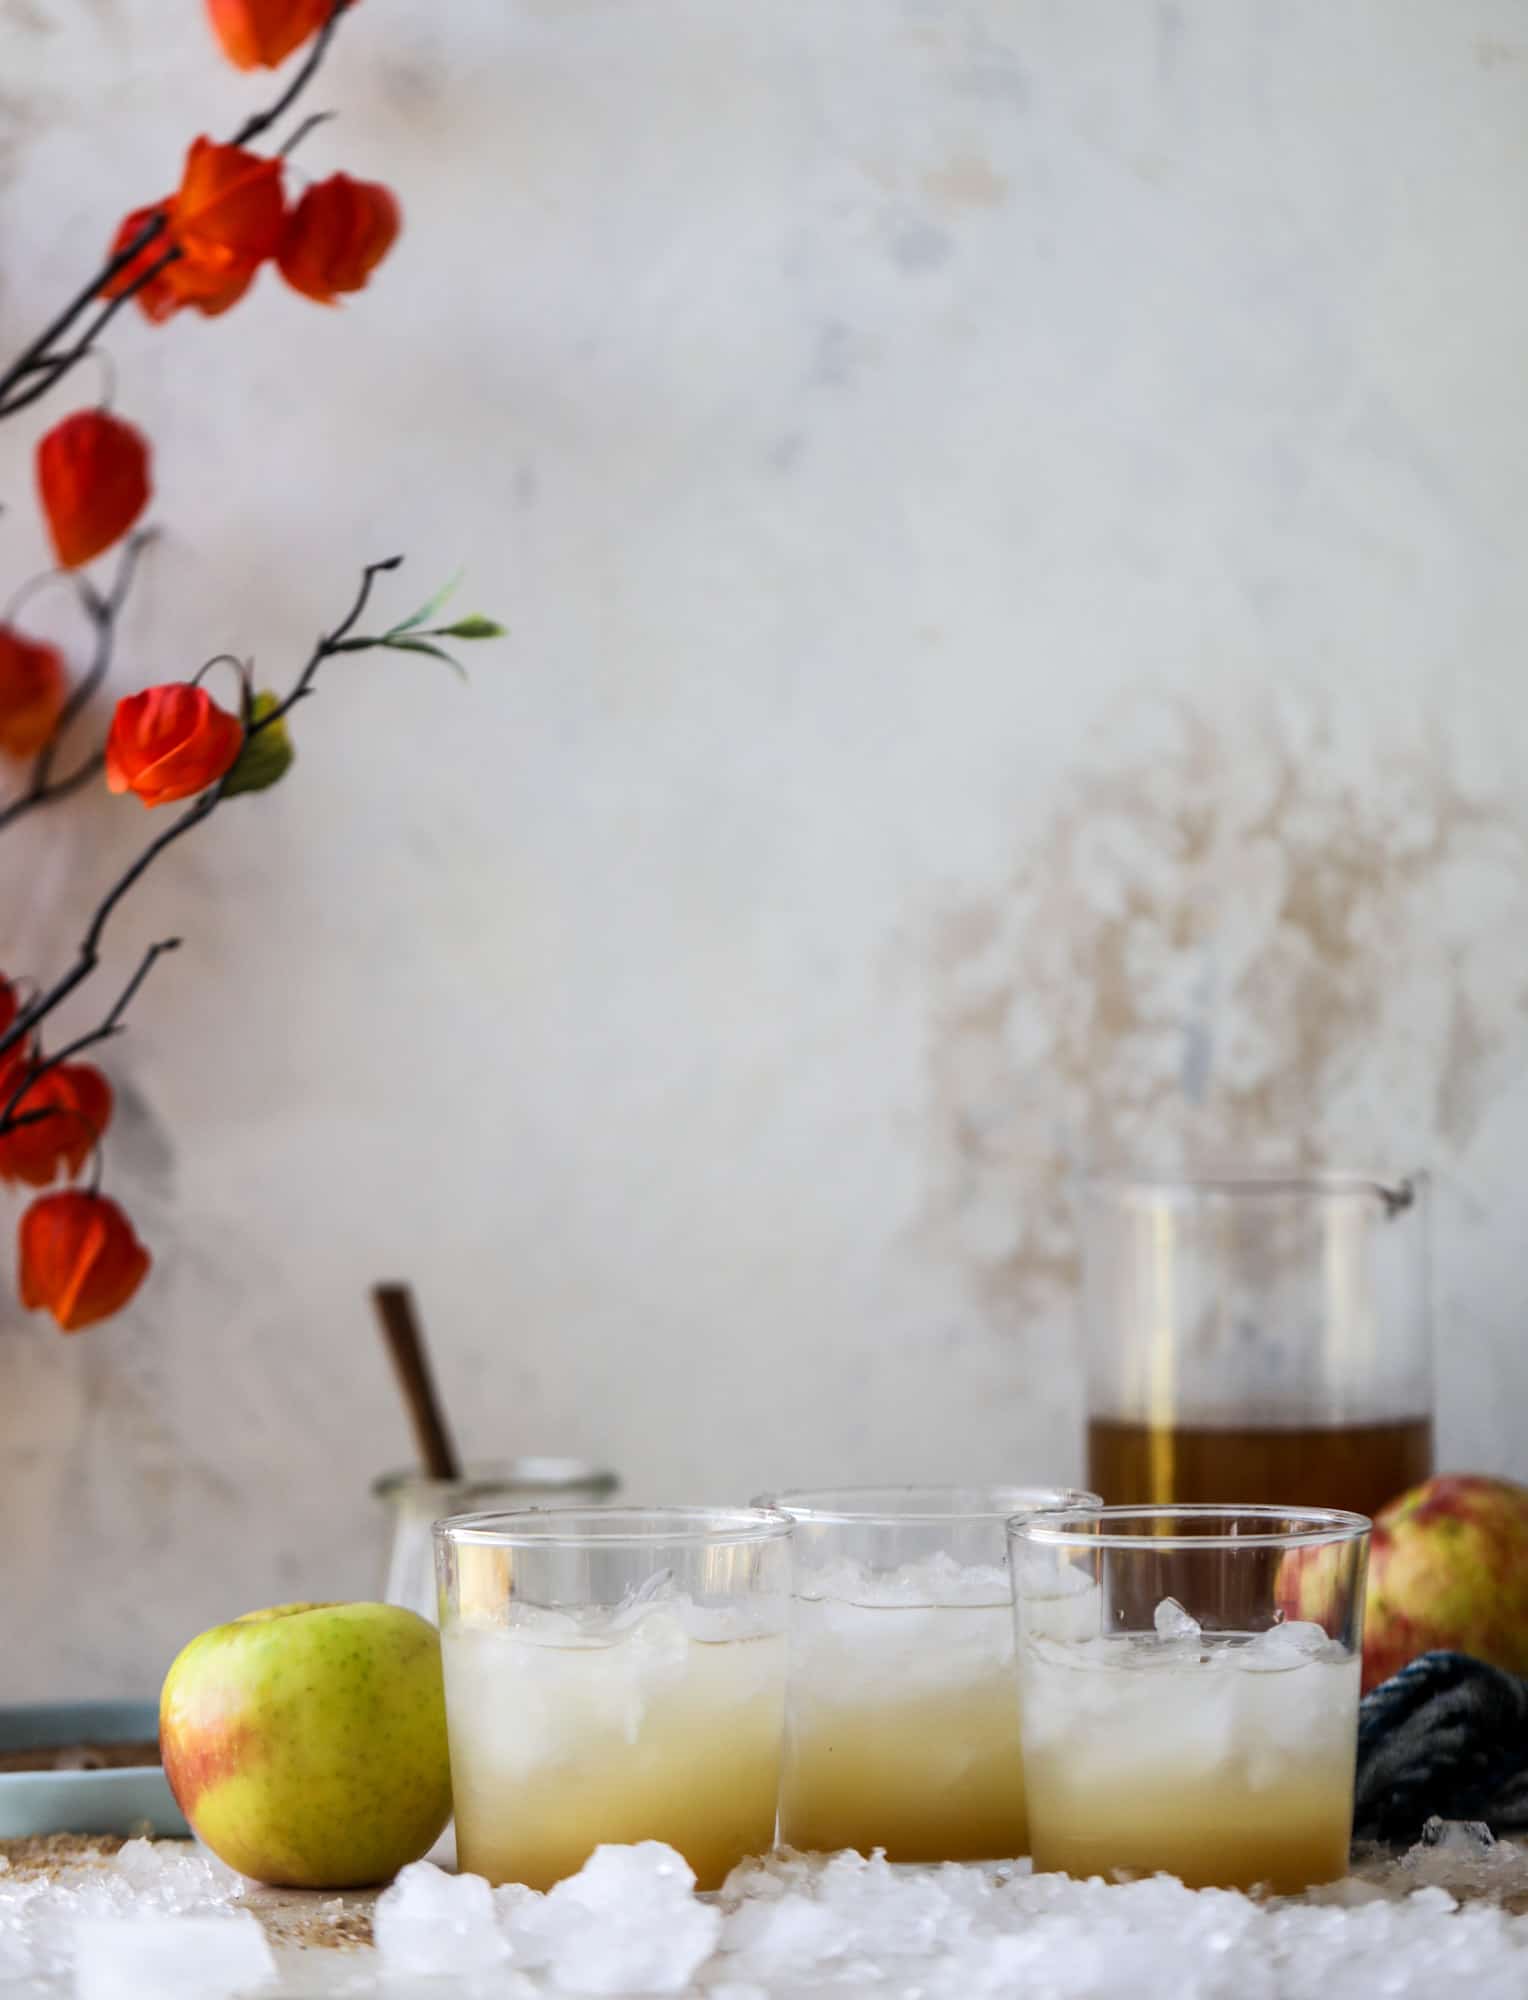 This honeycrisp apple cocktail is so perfect for fall! Fresh honeycrisp apple juice, honeycrisp apple syrup, vodka and ginger beer come together to create a refreshing, bubbly drink for autumn. Finished with a cinnamon sugar rim - YUM. I howsweeteats.com #honeycrisp #apple #cocktail #fall #drinks #vodka